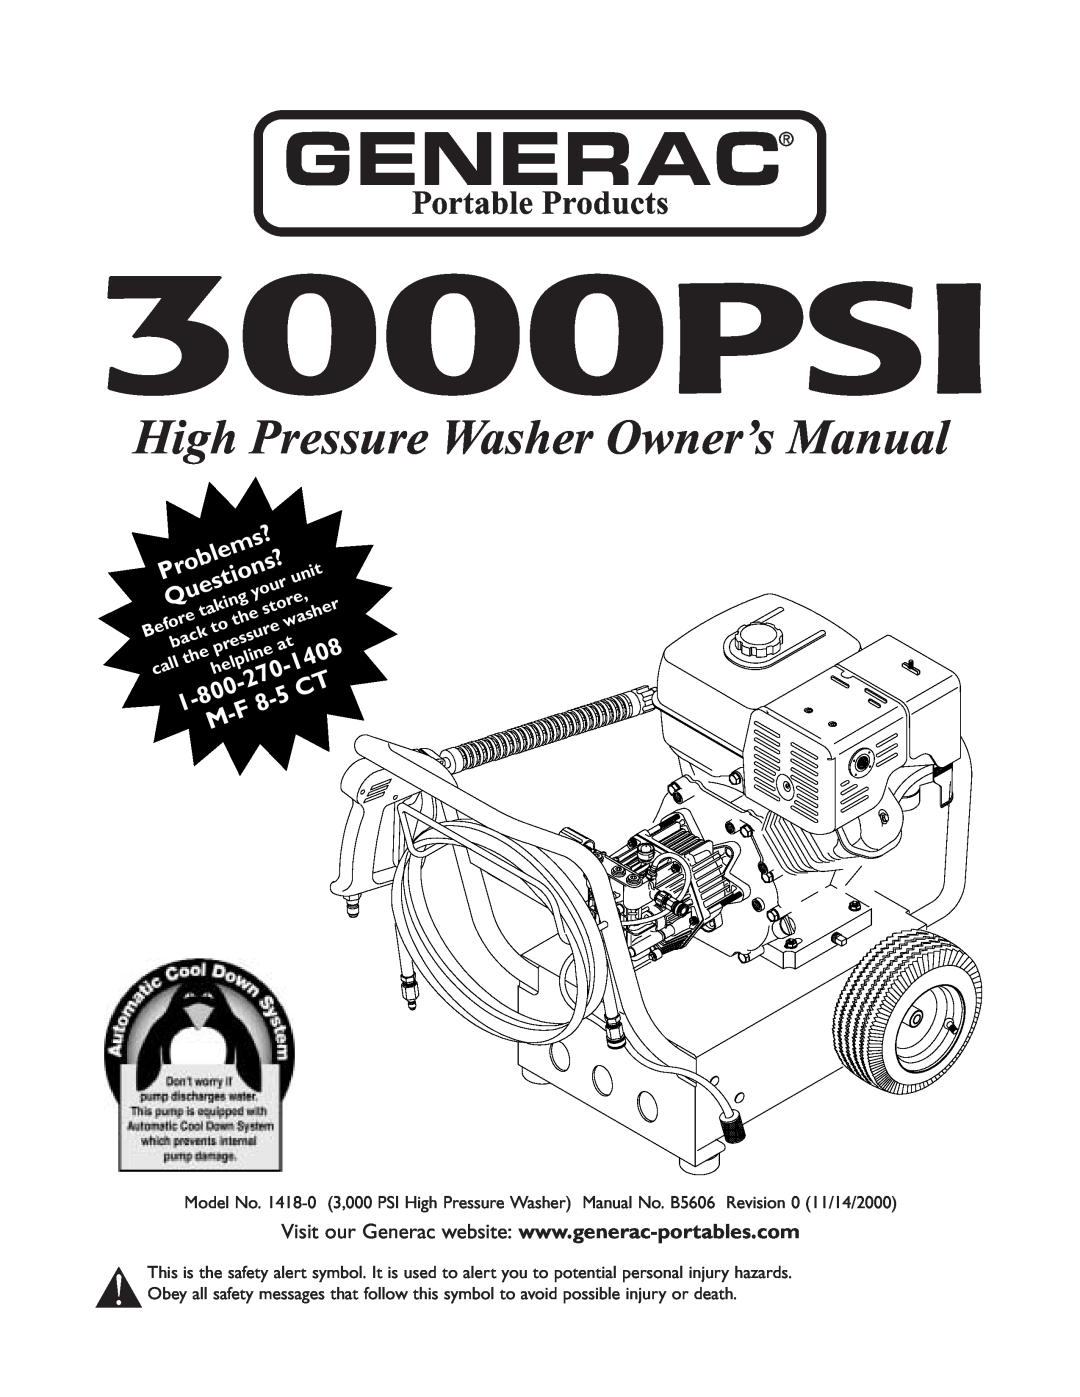 Generac 1418-0 manual 3000PSI, High Pressure Washer Owner’s Manual, Questions?, 1408, Problems?, unit, your, store, Before 